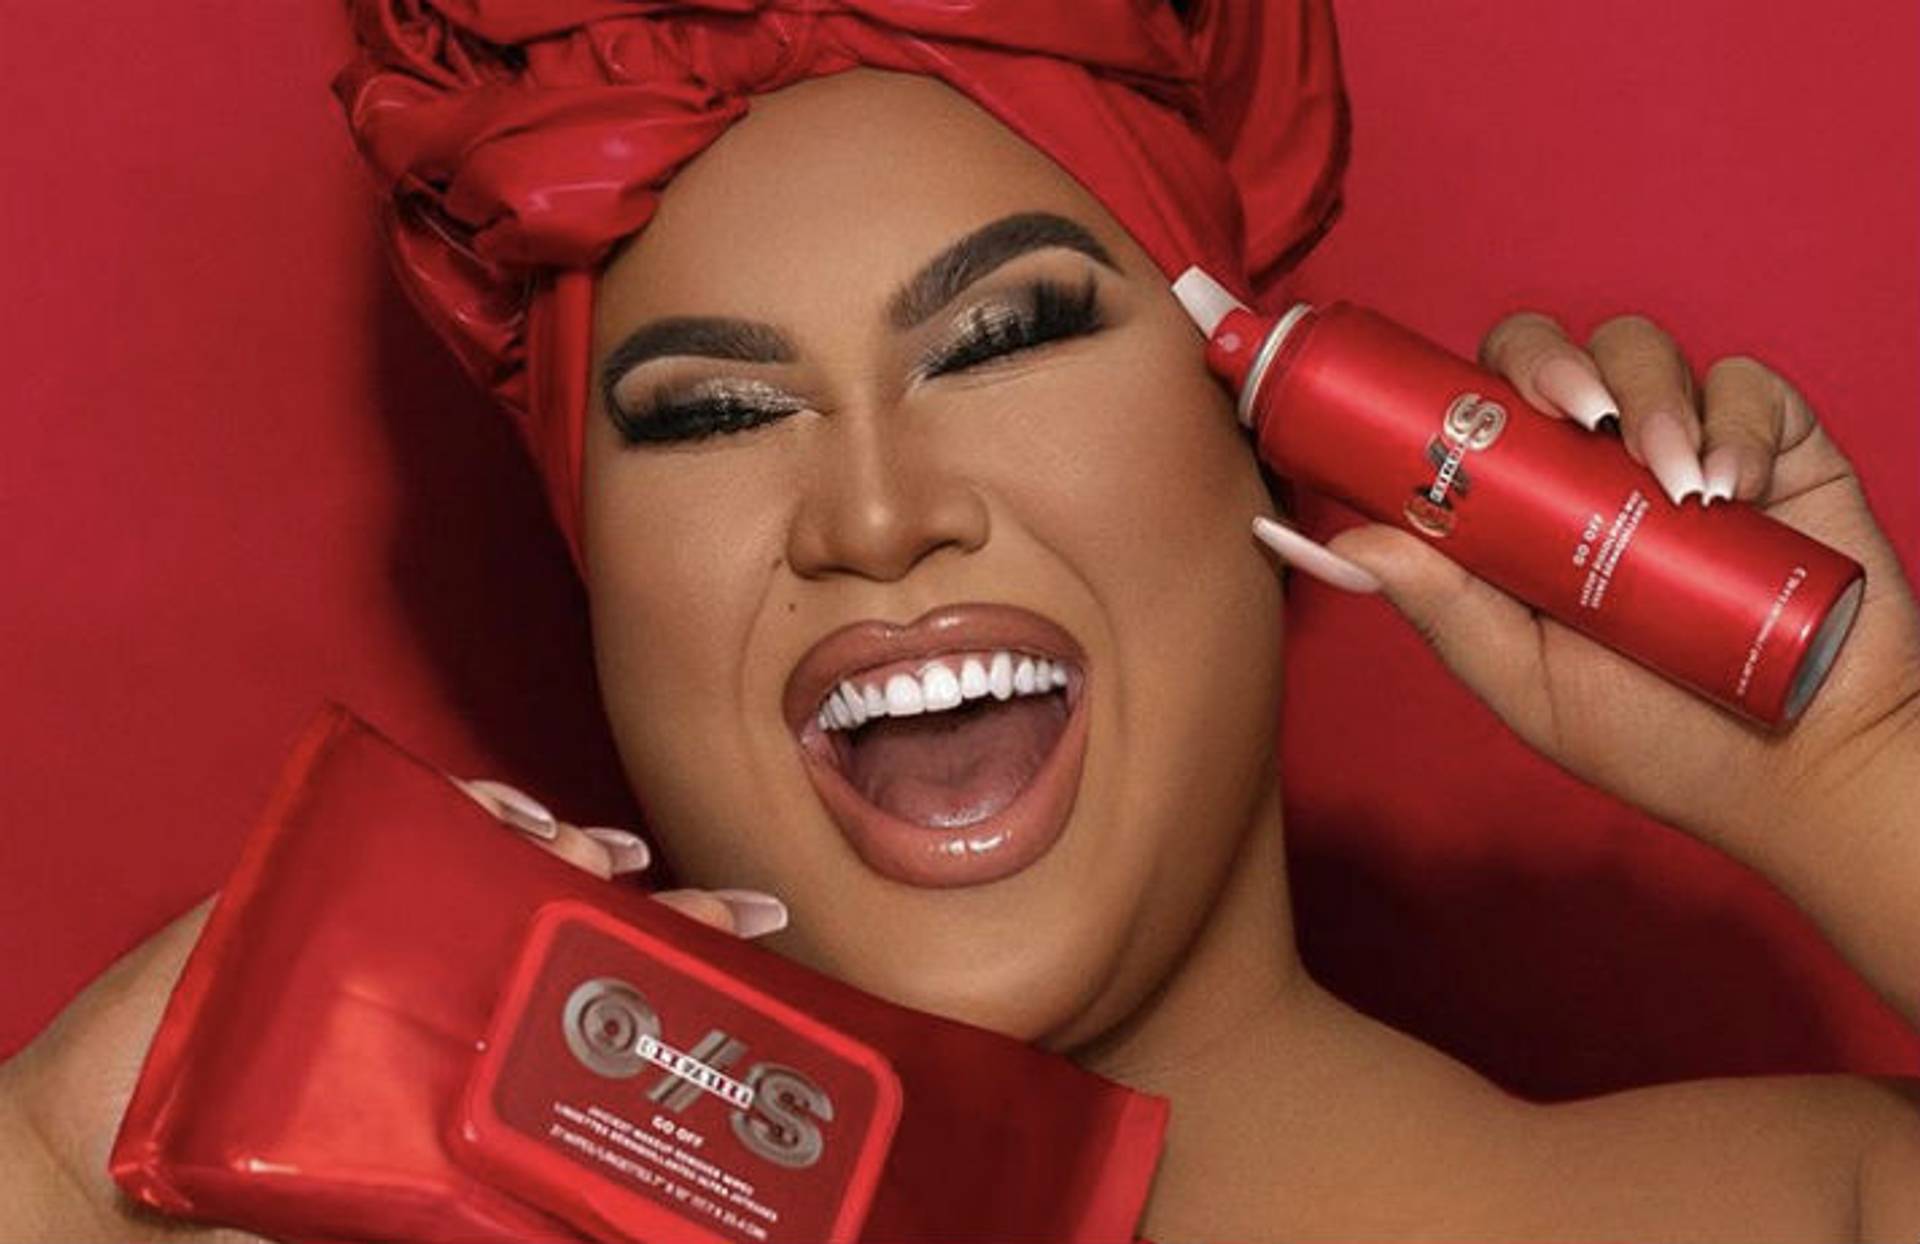 ONE/SIZE beauty champions gender-inclusive make-up